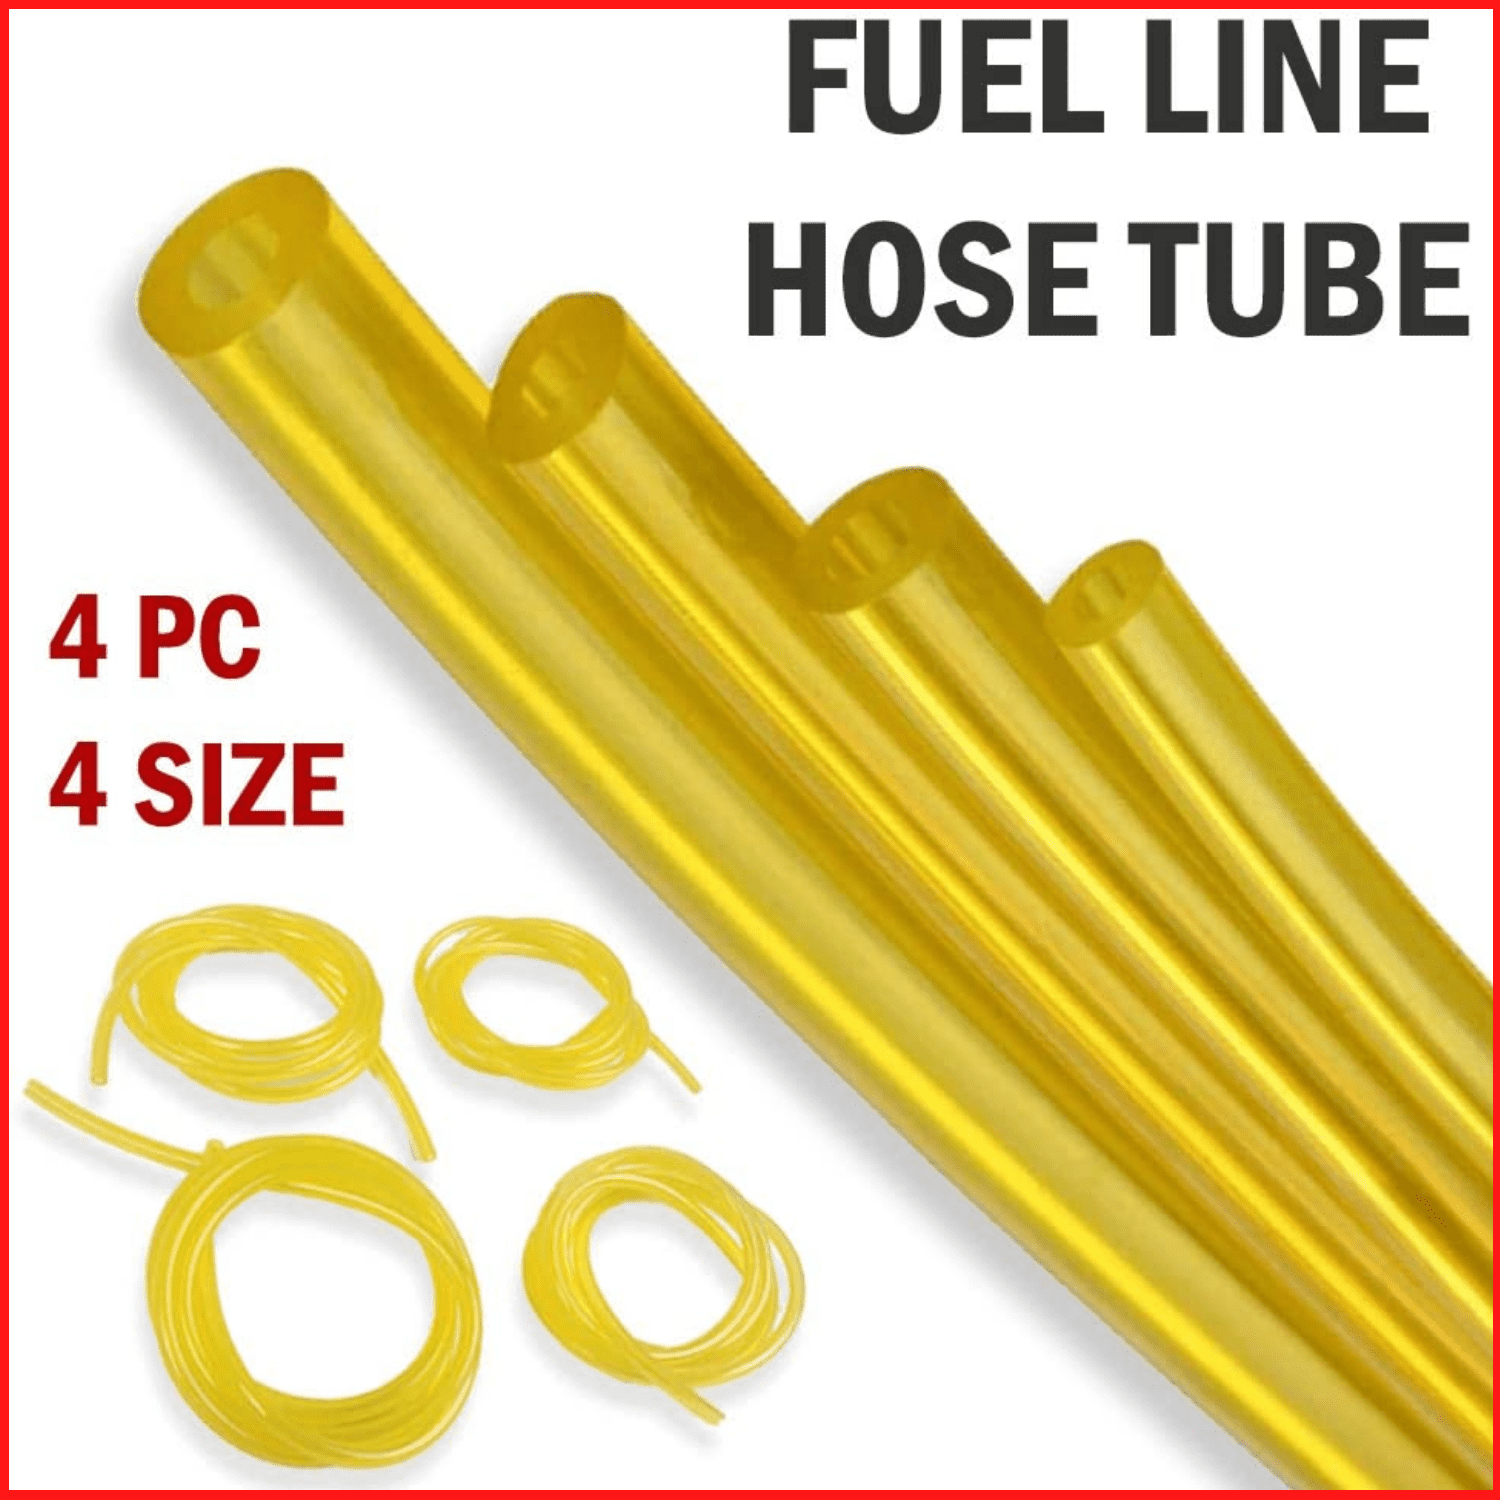 Details about   3 Sizes Petrol Fuel Gas Line Hose Pipe Kit For Trimmer Chainsaw Blower Engine US 